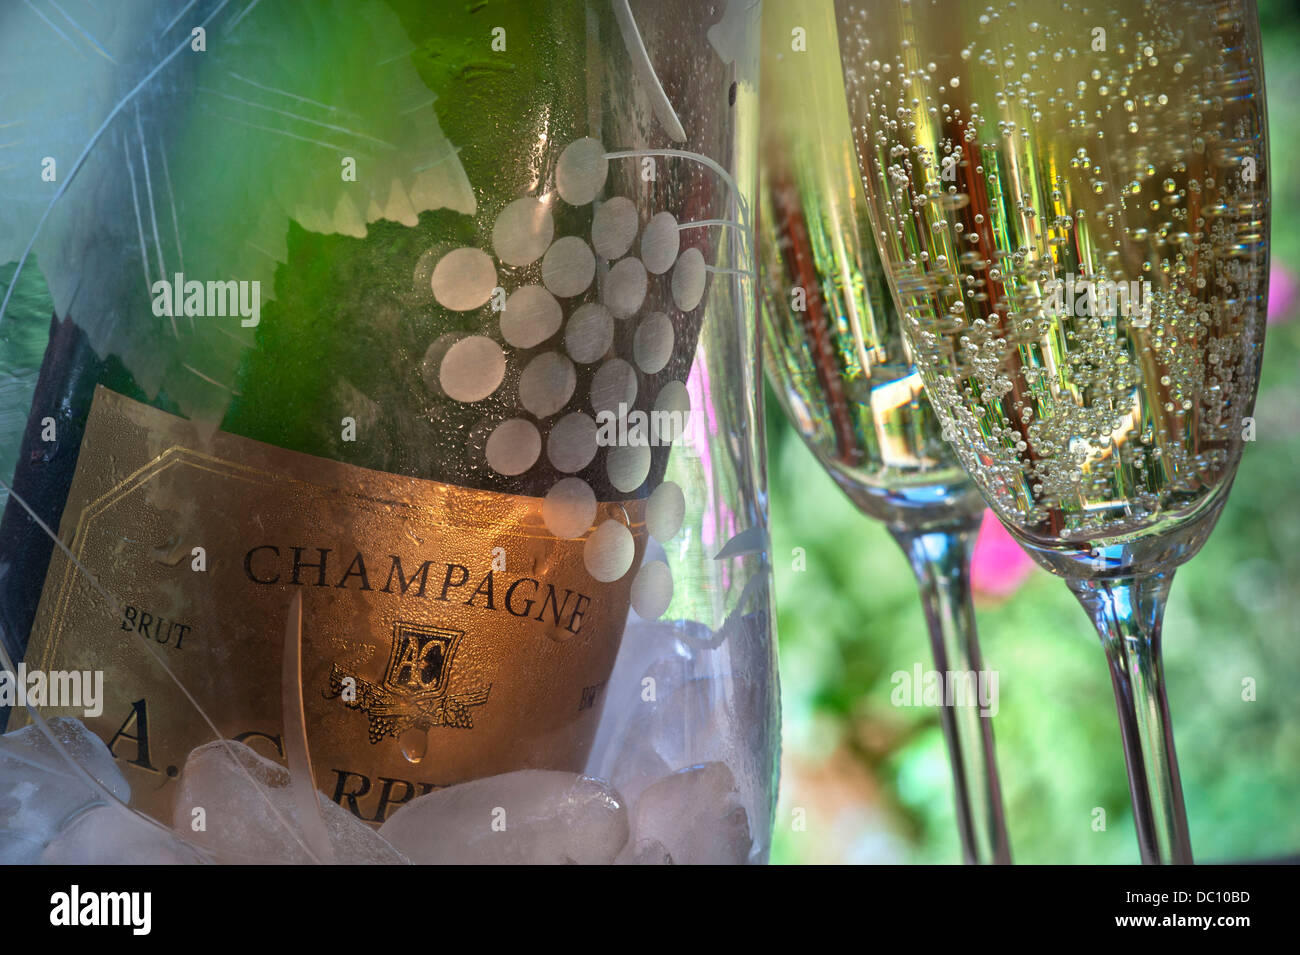 Two freshly poured glasses of Champagne with bottle on ice chilling in engraved crystal glass wine cooler in alfresco situation Stock Photo